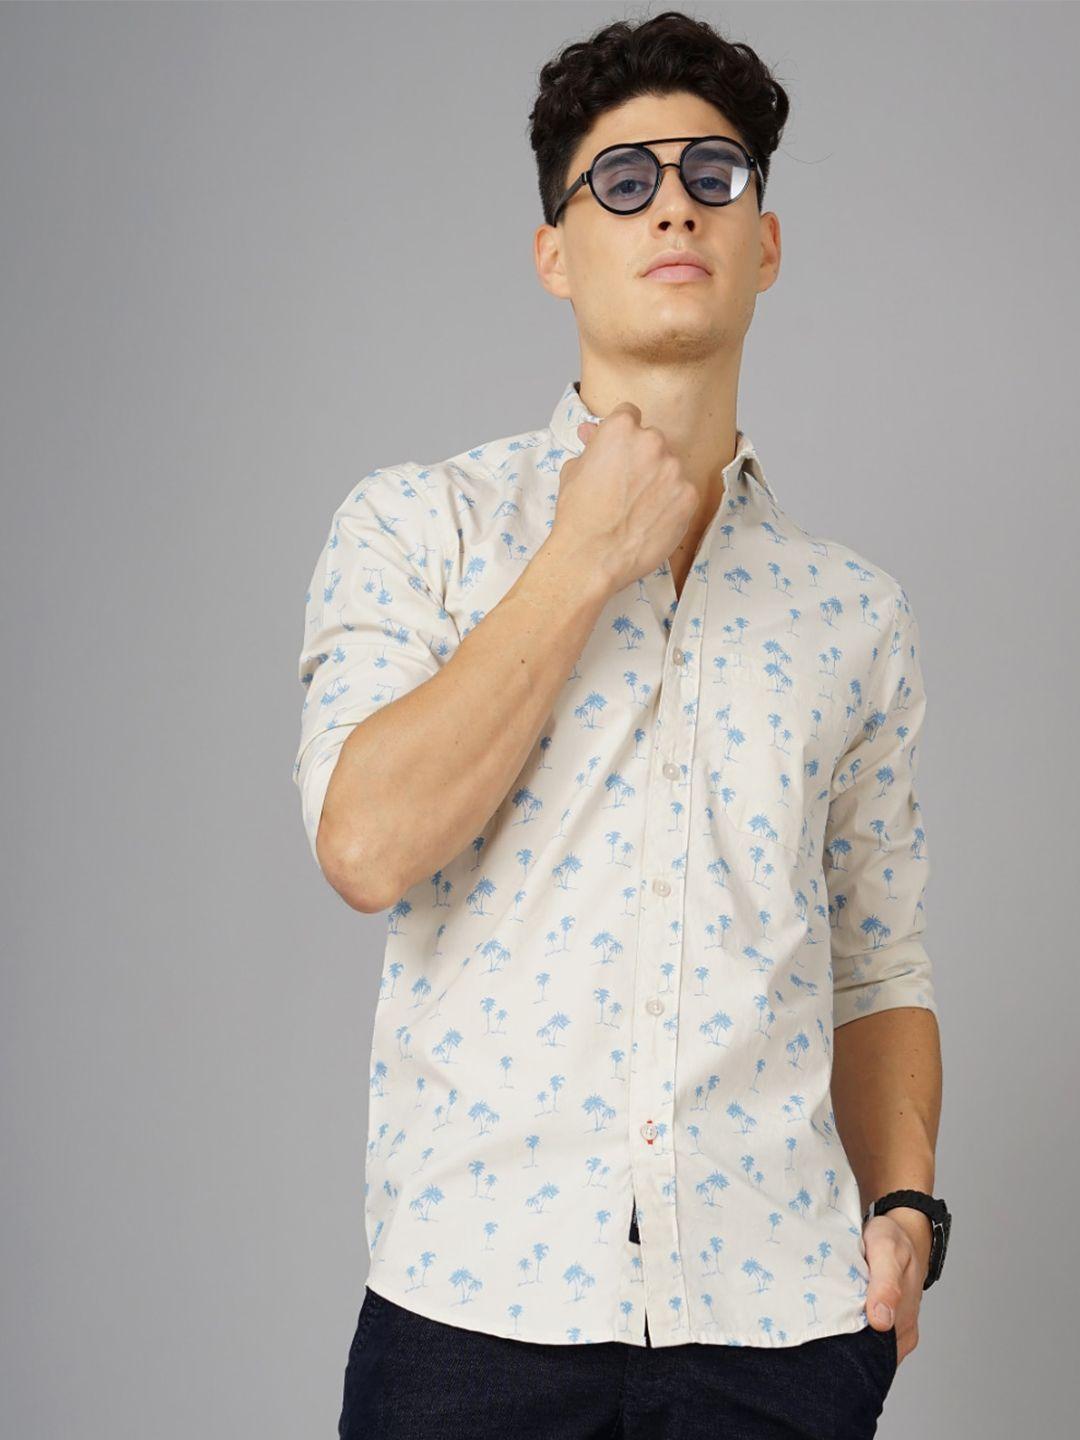 paul street standard slim fit floral printed spread collar cotton casual shirt